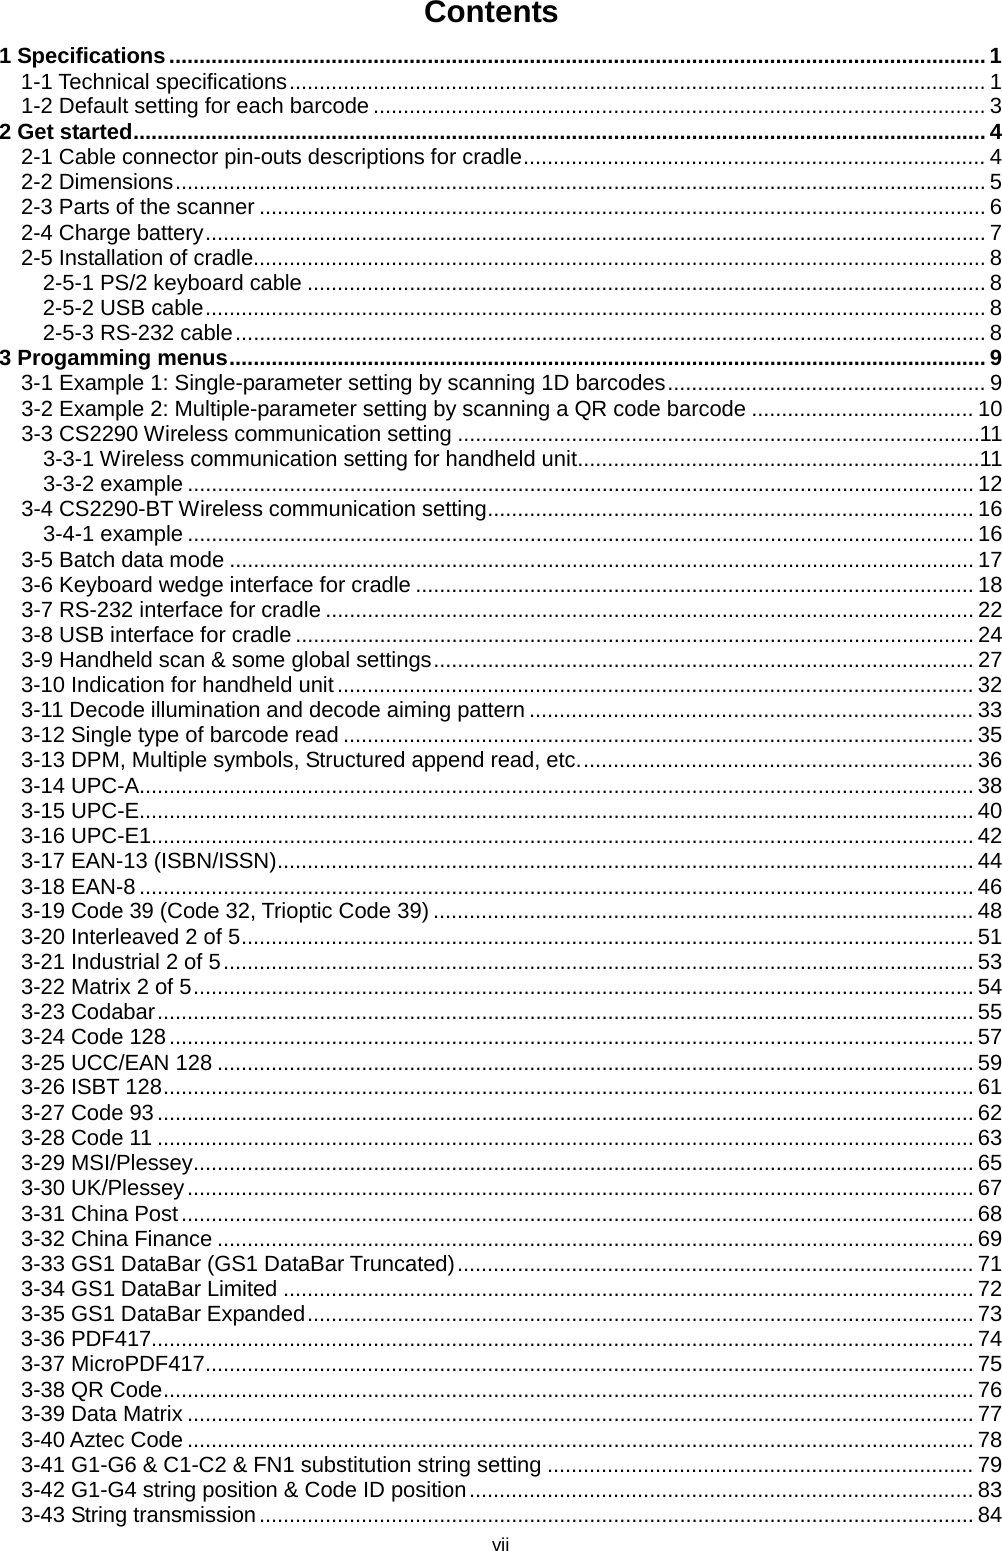 vii Contents 1 Specifications ........................................................................................................................................ 1 1-1 Technical specifications .................................................................................................................... 1 1-2 Default setting for each barcode ...................................................................................................... 3 2 Get started .............................................................................................................................................. 4 2-1 Cable connector pin-outs descriptions for cradle ............................................................................. 4 2-2 Dimensions ....................................................................................................................................... 5 2-3 Parts of the scanner ......................................................................................................................... 6 2-4 Charge battery .................................................................................................................................. 7 2-5 Installation of cradle.......................................................................................................................... 8 2-5-1 PS/2 keyboard cable ................................................................................................................. 8 2-5-2 USB cable .................................................................................................................................. 8 2-5-3 RS-232 cable ............................................................................................................................. 8 3 Progamming menus .............................................................................................................................. 9 3-1 Example 1: Single-parameter setting by scanning 1D barcodes ..................................................... 9 3-2 Example 2: Multiple-parameter setting by scanning a QR code barcode ..................................... 10 3-3 CS2290 Wireless communication setting ....................................................................................... 11 3-3-1 Wireless communication setting for handheld unit ................................................................... 11 3-3-2 example ................................................................................................................................... 12 3-4 CS2290-BT Wireless communication setting ................................................................................. 16 3-4-1 example ................................................................................................................................... 16 3-5 Batch data mode ............................................................................................................................ 17 3-6 Keyboard wedge interface for cradle ............................................................................................. 18 3-7 RS-232 interface for cradle ............................................................................................................ 22 3-8 USB interface for cradle ................................................................................................................. 24 3-9 Handheld scan &amp; some global settings .......................................................................................... 27 3-10 Indication for handheld unit .......................................................................................................... 32 3-11 Decode illumination and decode aiming pattern .......................................................................... 33 3-12 Single type of barcode read ......................................................................................................... 35 3-13 DPM, Multiple symbols, Structured append read, etc. ................................................................. 36 3-14 UPC-A........................................................................................................................................... 38 3-15 UPC-E........................................................................................................................................... 40 3-16 UPC-E1......................................................................................................................................... 42 3-17 EAN-13 (ISBN/ISSN) .................................................................................................................... 44 3-18 EAN-8 ........................................................................................................................................... 46 3-19 Code 39 (Code 32, Trioptic Code 39) .......................................................................................... 48 3-20 Interleaved 2 of 5 .......................................................................................................................... 51 3-21 Industrial 2 of 5 ............................................................................................................................. 53 3-22 Matrix 2 of 5 .................................................................................................................................. 54 3-23 Codabar ........................................................................................................................................ 55 3-24 Code 128 ...................................................................................................................................... 57 3-25 UCC/EAN 128 .............................................................................................................................. 59 3-26 ISBT 128 ....................................................................................................................................... 61 3-27 Code 93 ........................................................................................................................................ 62 3-28 Code 11 ........................................................................................................................................ 63 3-29 MSI/Plessey .................................................................................................................................. 65 3-30 UK/Plessey ................................................................................................................................... 67 3-31 China Post .................................................................................................................................... 68 3-32 China Finance .............................................................................................................................. 69 3-33 GS1 DataBar (GS1 DataBar Truncated) ...................................................................................... 71 3-34 GS1 DataBar Limited ................................................................................................................... 72 3-35 GS1 DataBar Expanded ............................................................................................................... 73 3-36 PDF417......................................................................................................................................... 74 3-37 MicroPDF417 ................................................................................................................................ 75 3-38 QR Code ....................................................................................................................................... 76 3-39 Data Matrix ................................................................................................................................... 77 3-40 Aztec Code ................................................................................................................................... 78 3-41 G1-G6 &amp; C1-C2 &amp; FN1 substitution string setting ....................................................................... 79 3-42 G1-G4 string position &amp; Code ID position .................................................................................... 83 3-43 String transmission ....................................................................................................................... 84 